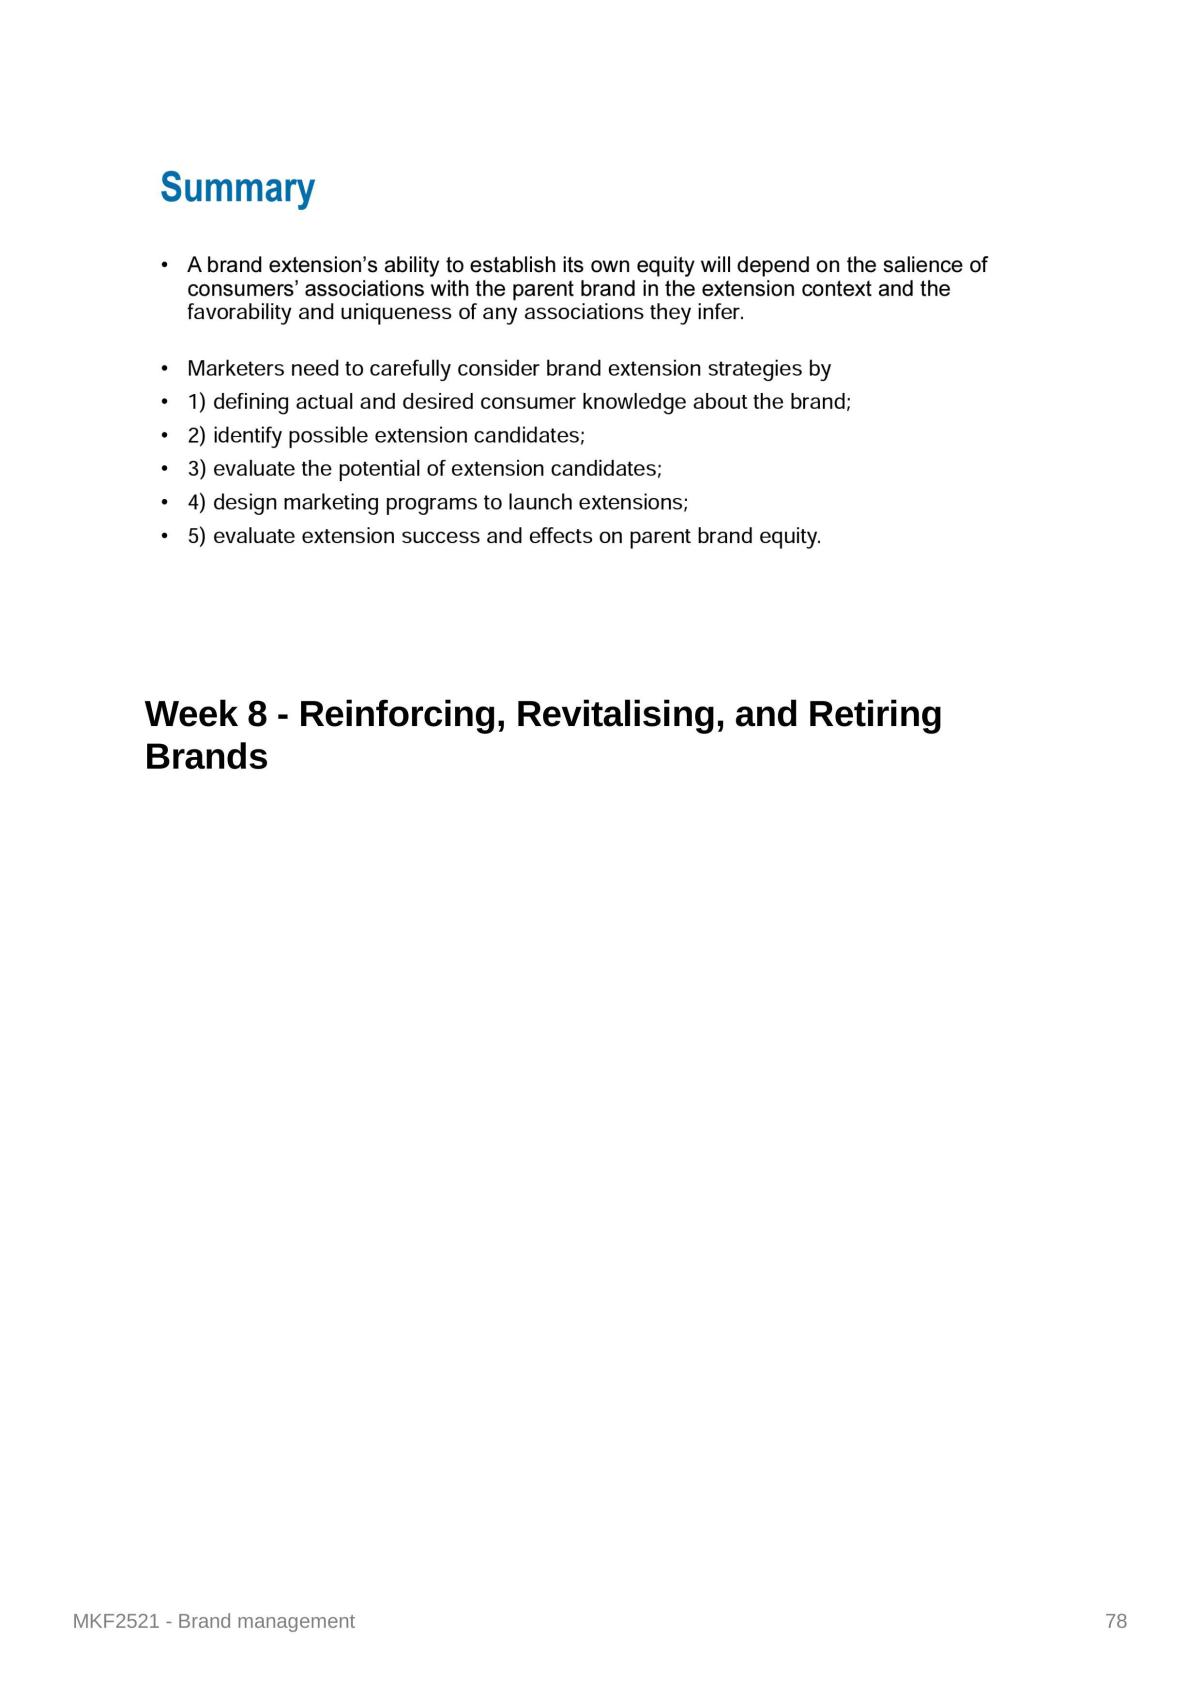 MKF2521 - Brand management Week 1 to 12 study notes - Page 78